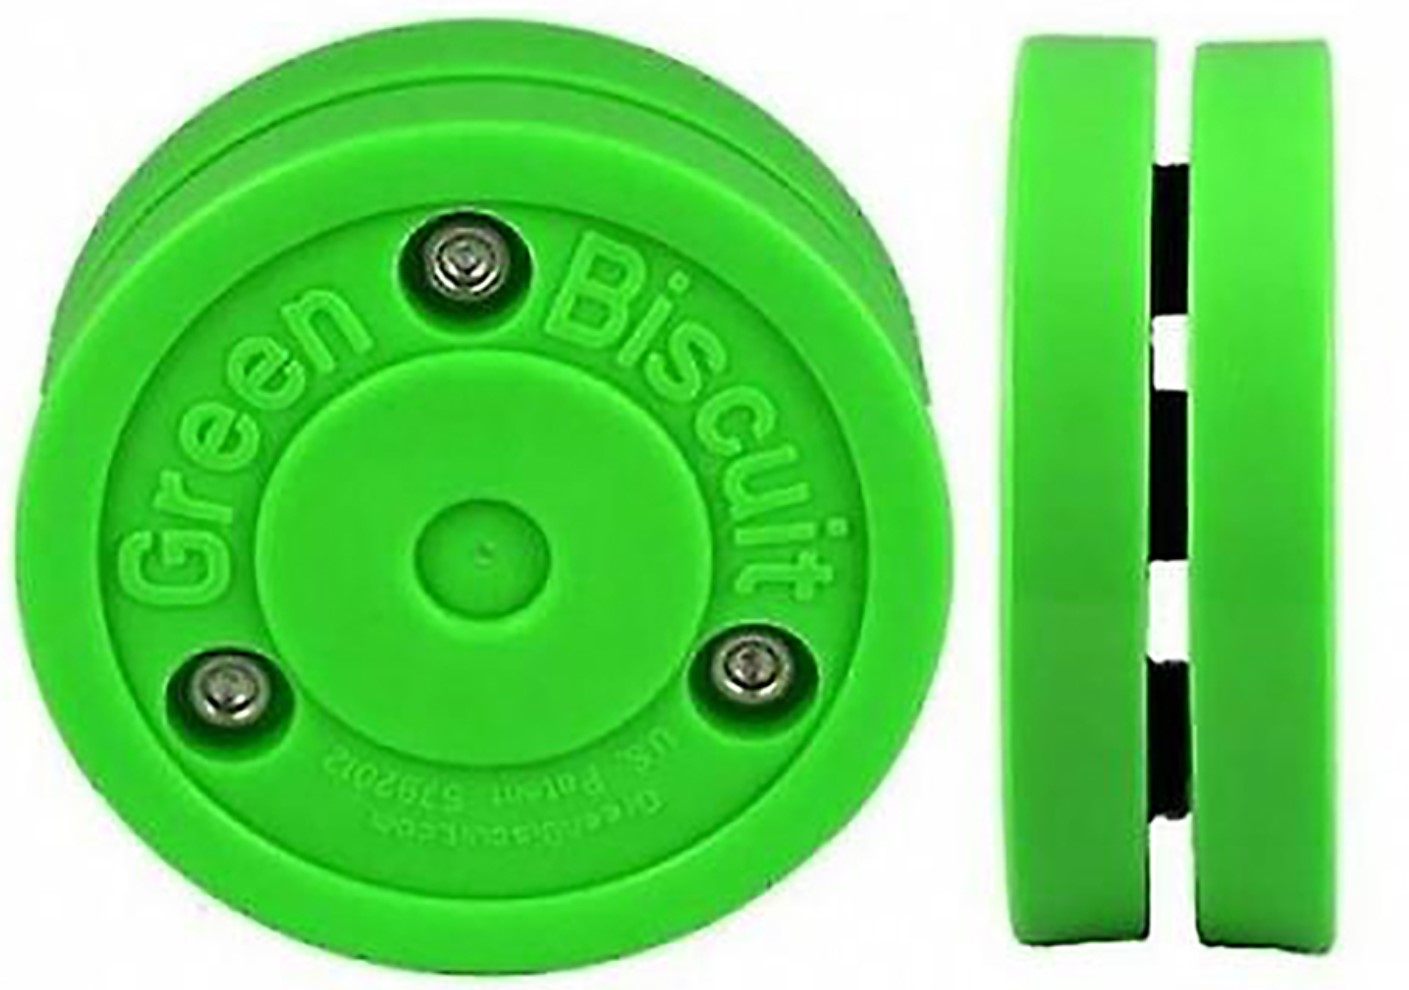 Green Biscuit inline hockey puck that does not roll